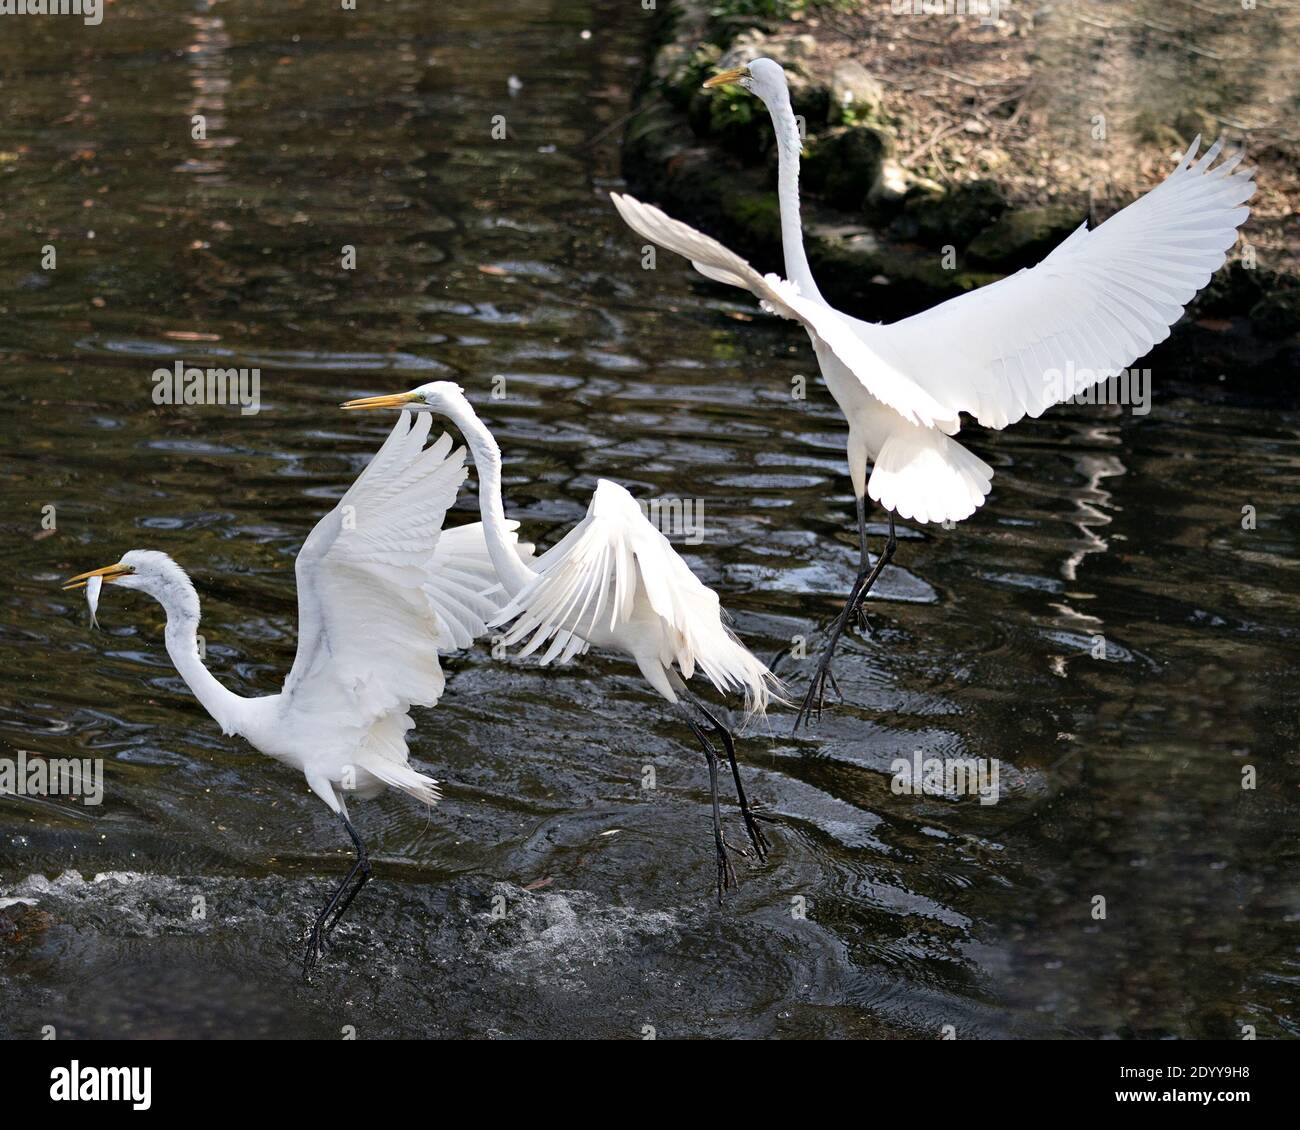 Great White Egret birds close-up profile view flying over water with spread wings with a water background and one bird with a fish in its beak. Angel. Stock Photo